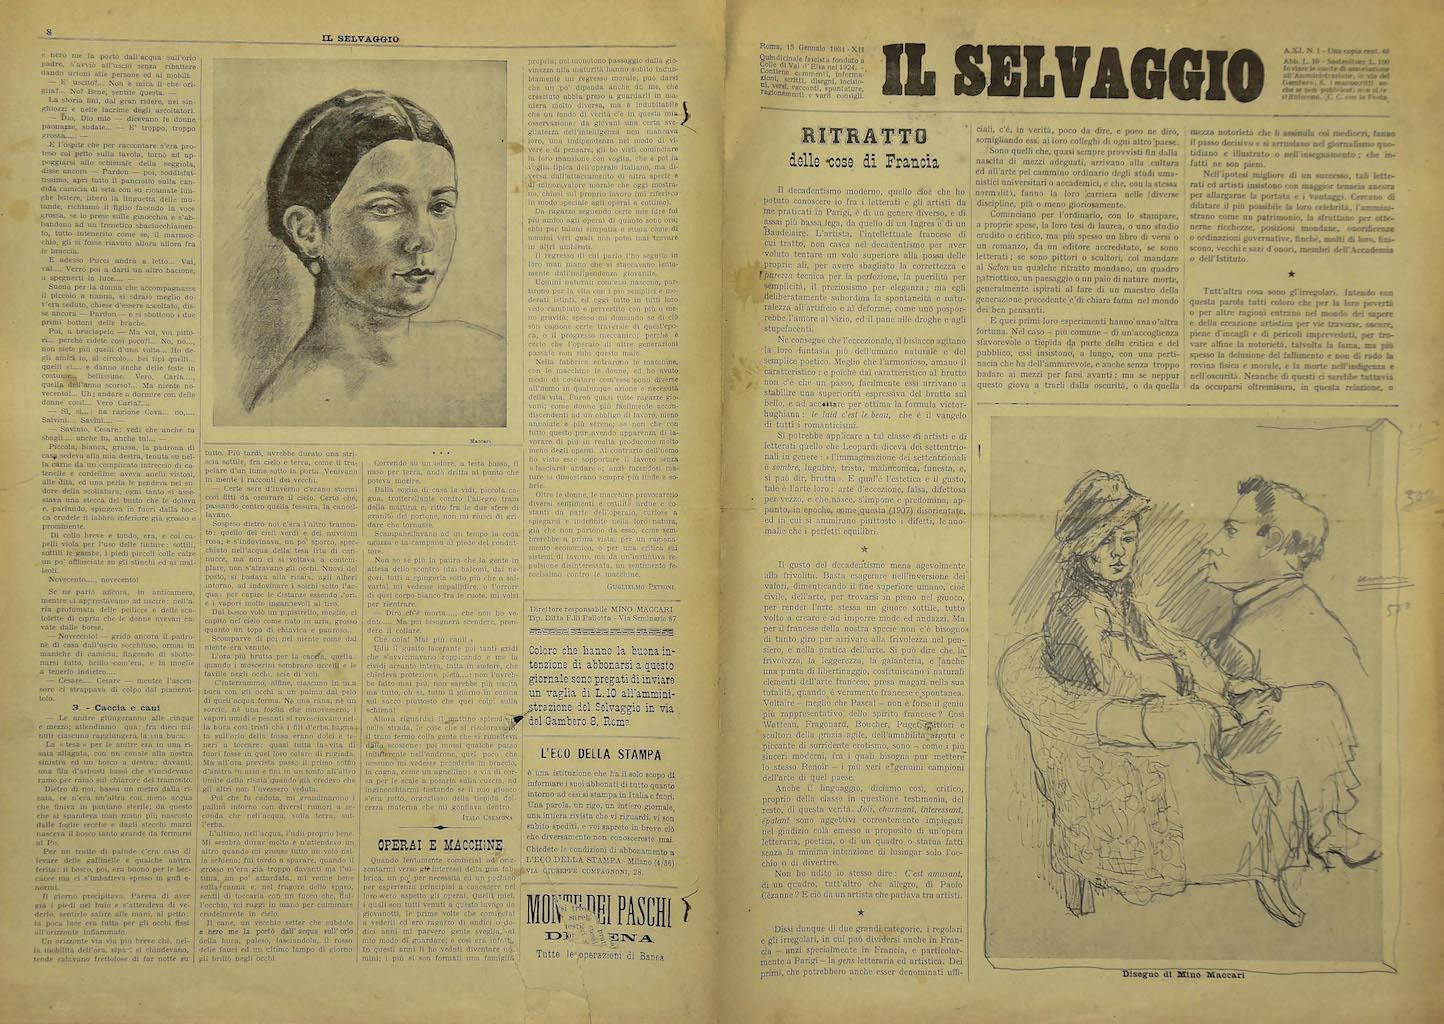  "Il Selvaggio, no.1- 1934", "Annual supporter subscription - Una copia 40 Cent - Fortnightly Newspaper letters arts and sciences".
Original engravings by the artist Mino Maccari. 8 pages.

Good conditions, except some cut piece of paper and some